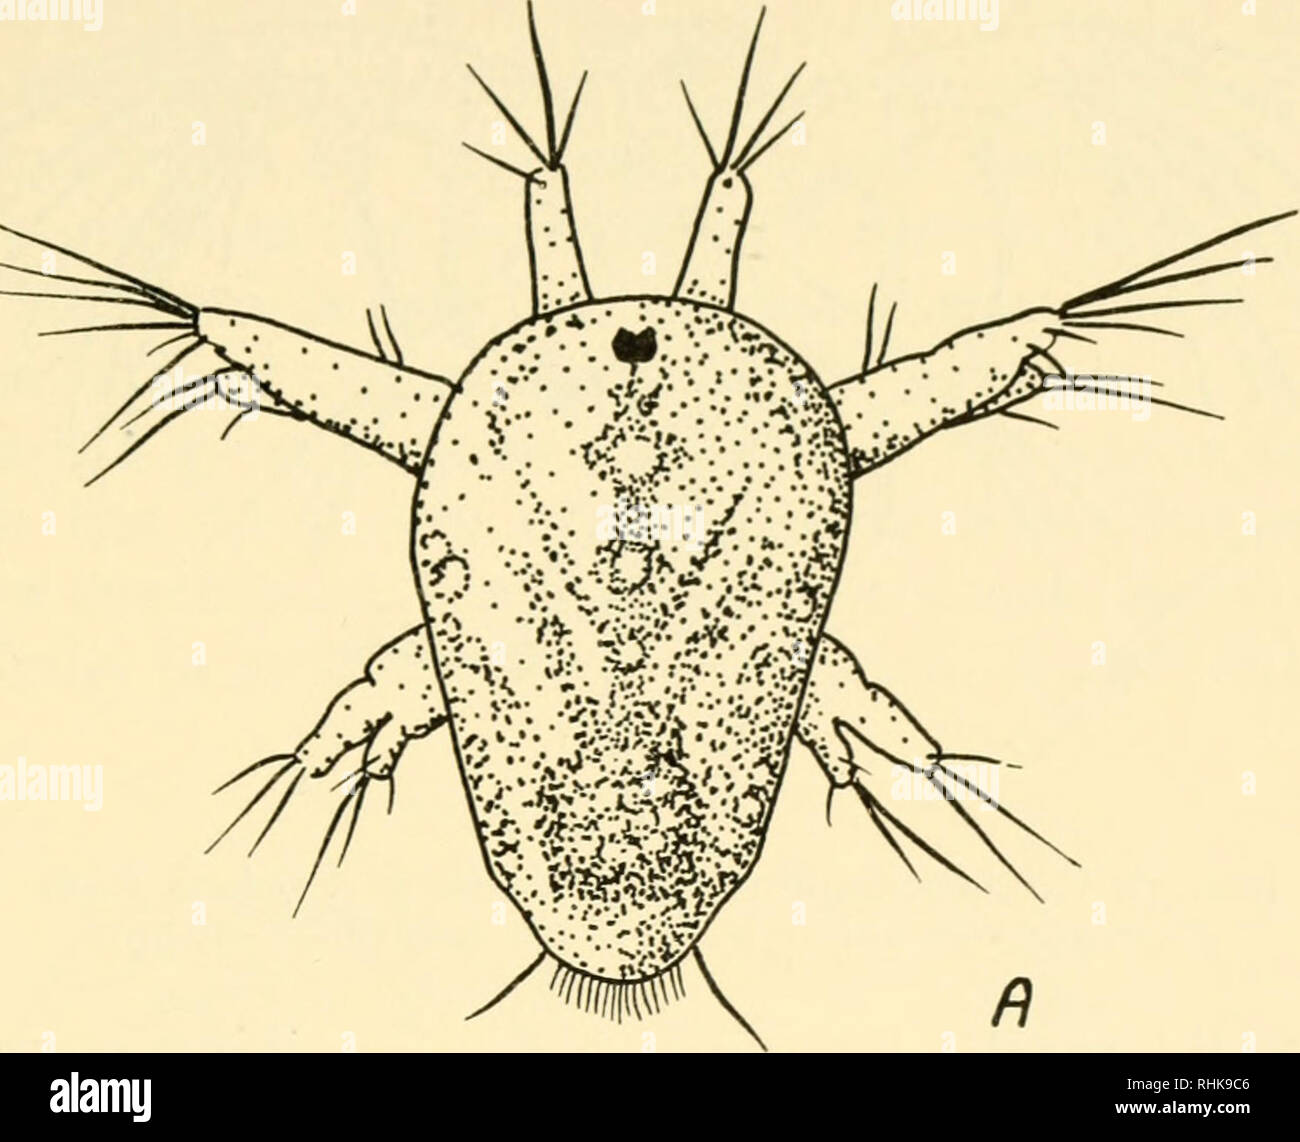 . A biology of Crustacea. Crustacea. GROWTH AND LIFE HISTORIES 73. Fig. 33. A, first nauplius of Cyclops fuscus (Copepoda), dorsal view. towards the adult form, as found in the Notostraca and Anostraca (figs. 34A-B) or there may be a number of very different stages involved. The nauplius of a copepod, such as Calanus, may moult five times, still retaining the nauplius form. At the next moult it will change into a copepodid, which is similar to the adult, except that it is not sexually mature, and the limbs are not fully developed.. Please note that these images are extracted from scanned page  Stock Photo